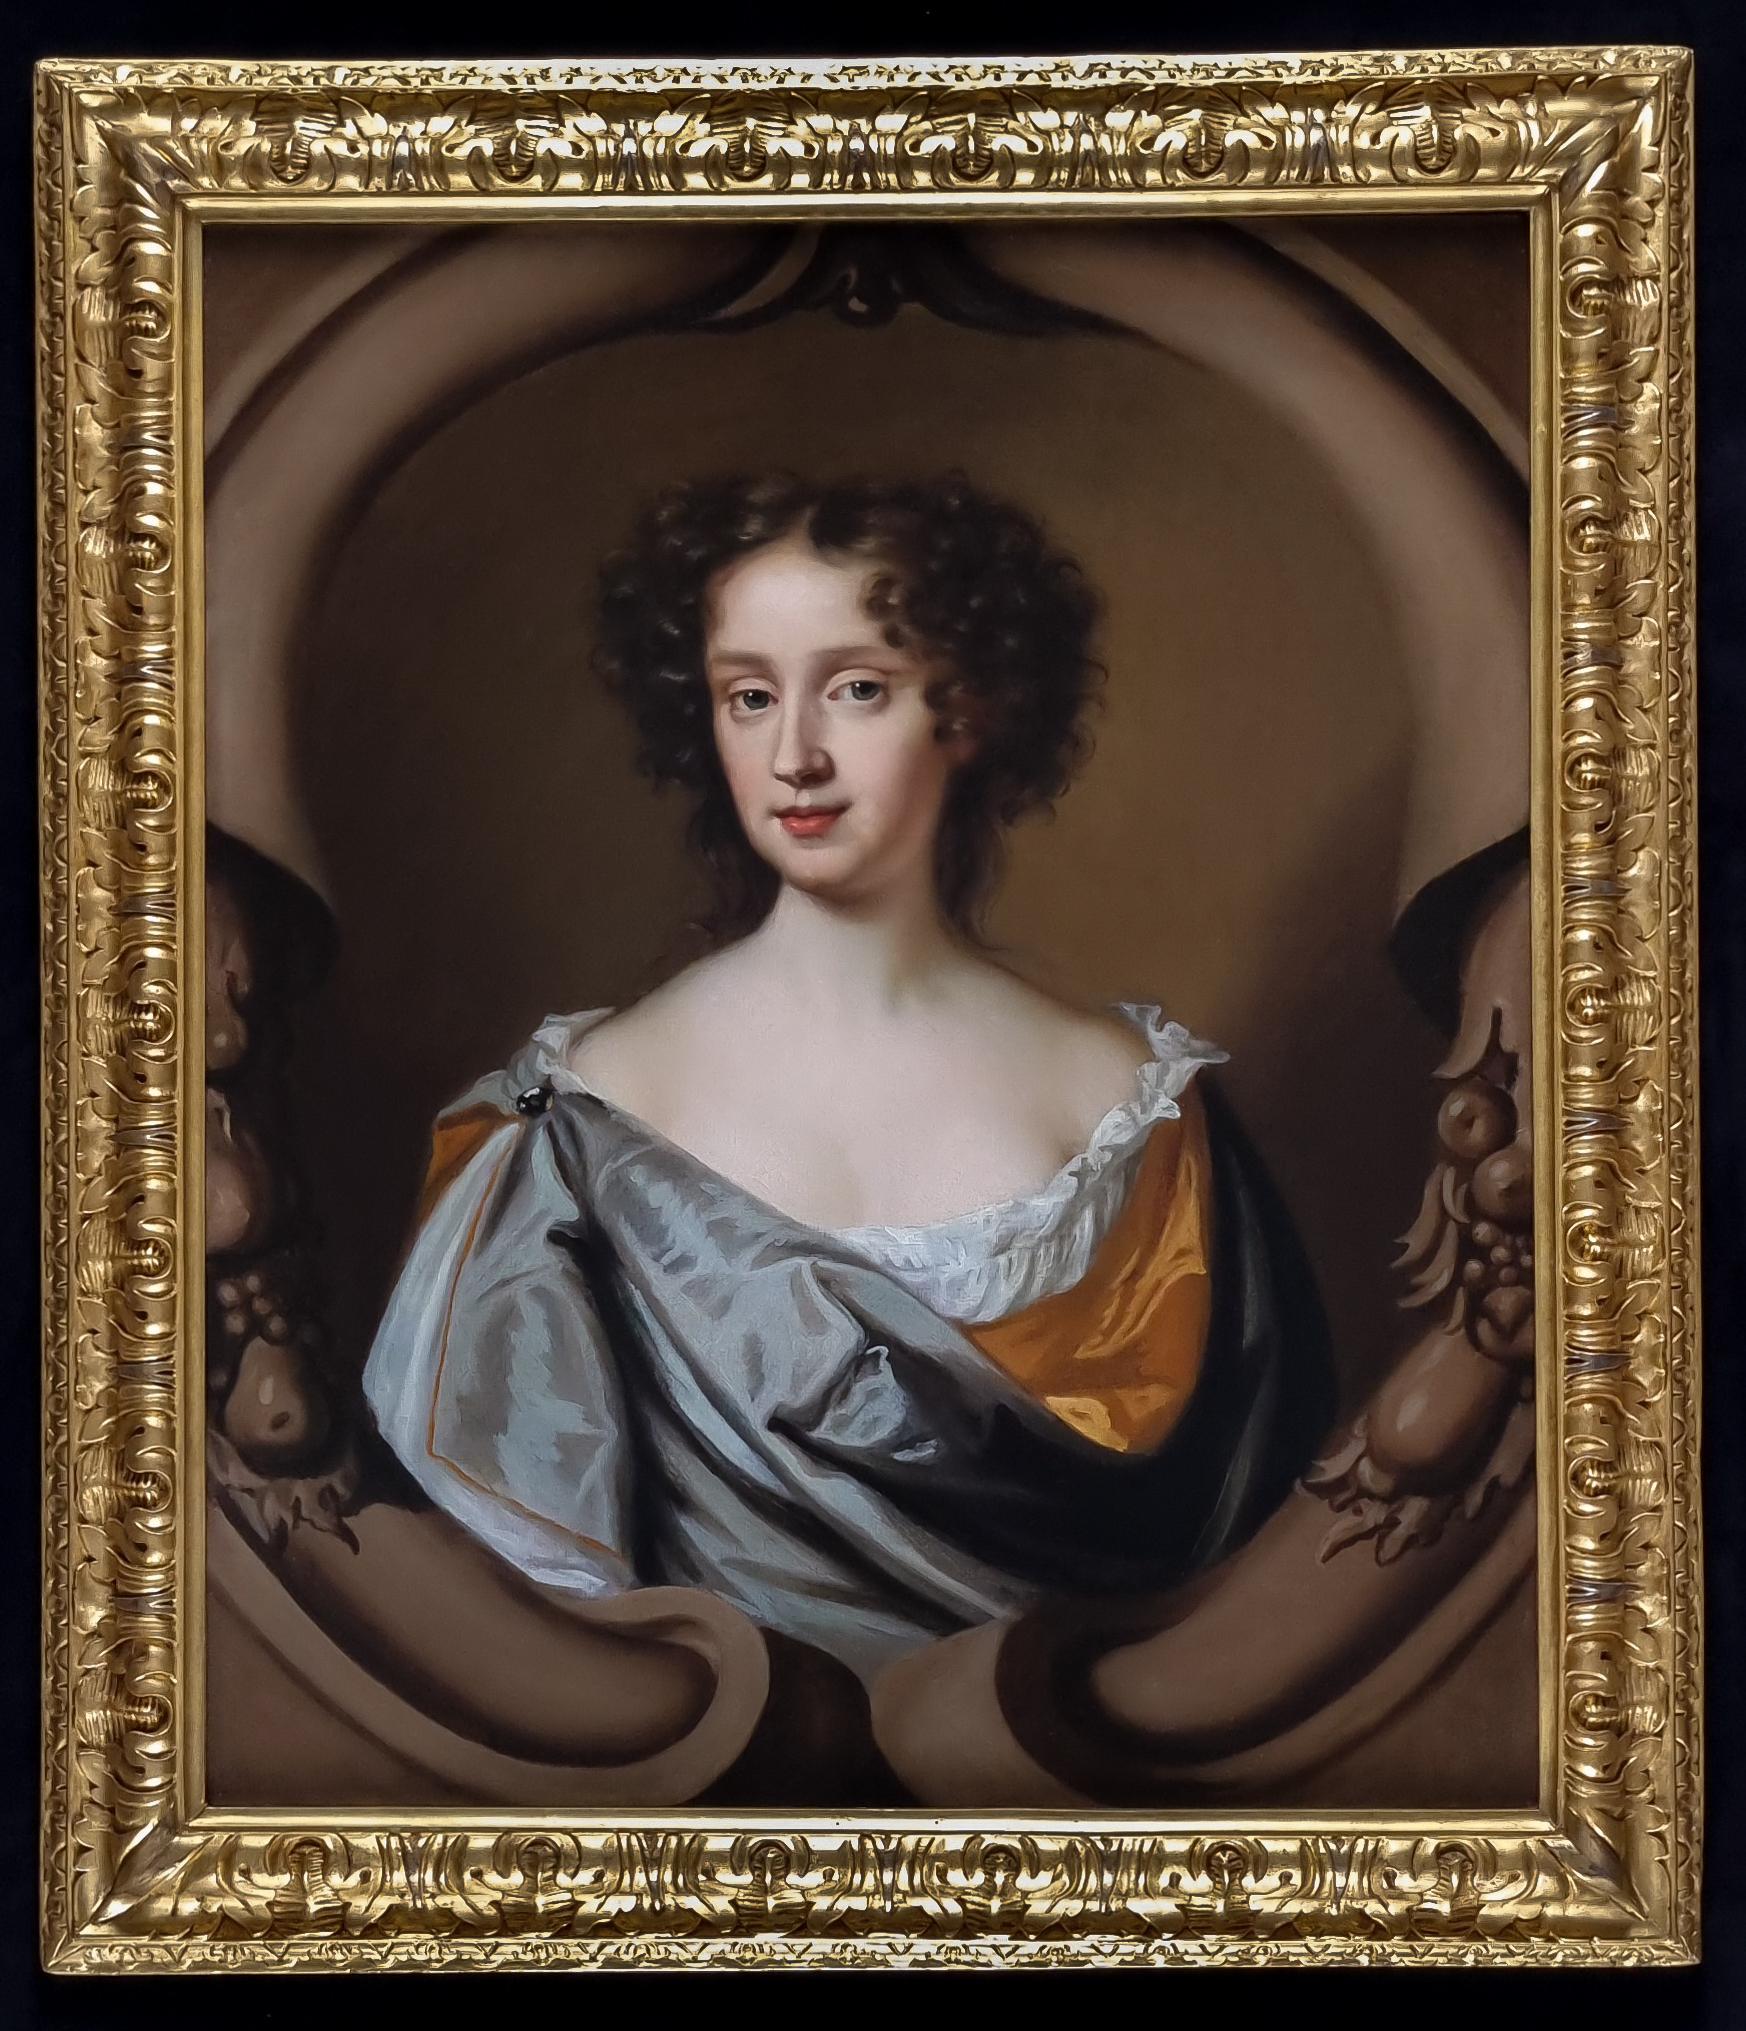 Mary Beale Portrait Painting - Portrait of a Lady in an Elaborate Stone Cartouche, Oil on canvas Painting 